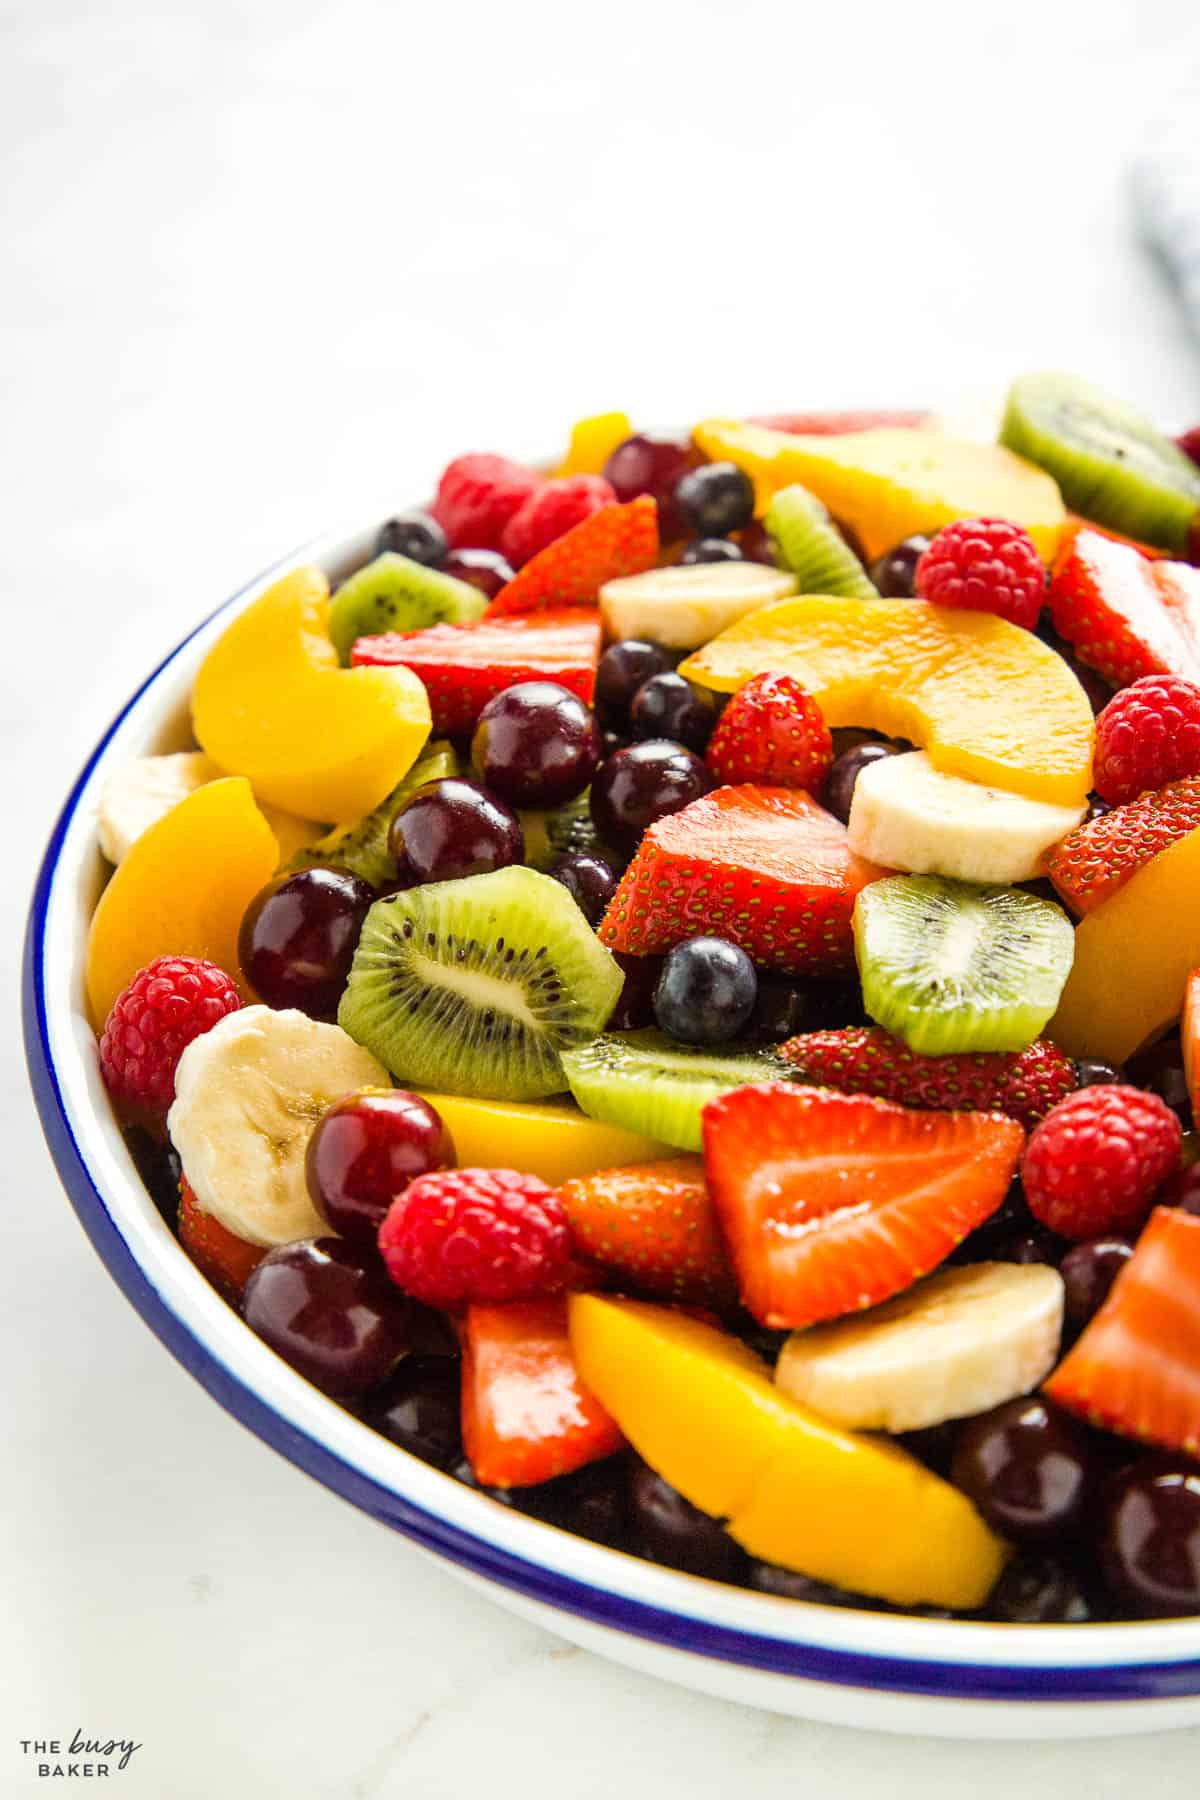 a bowl with banana slices, strawberries, raspberries, blueberries, kiwis, and peaches